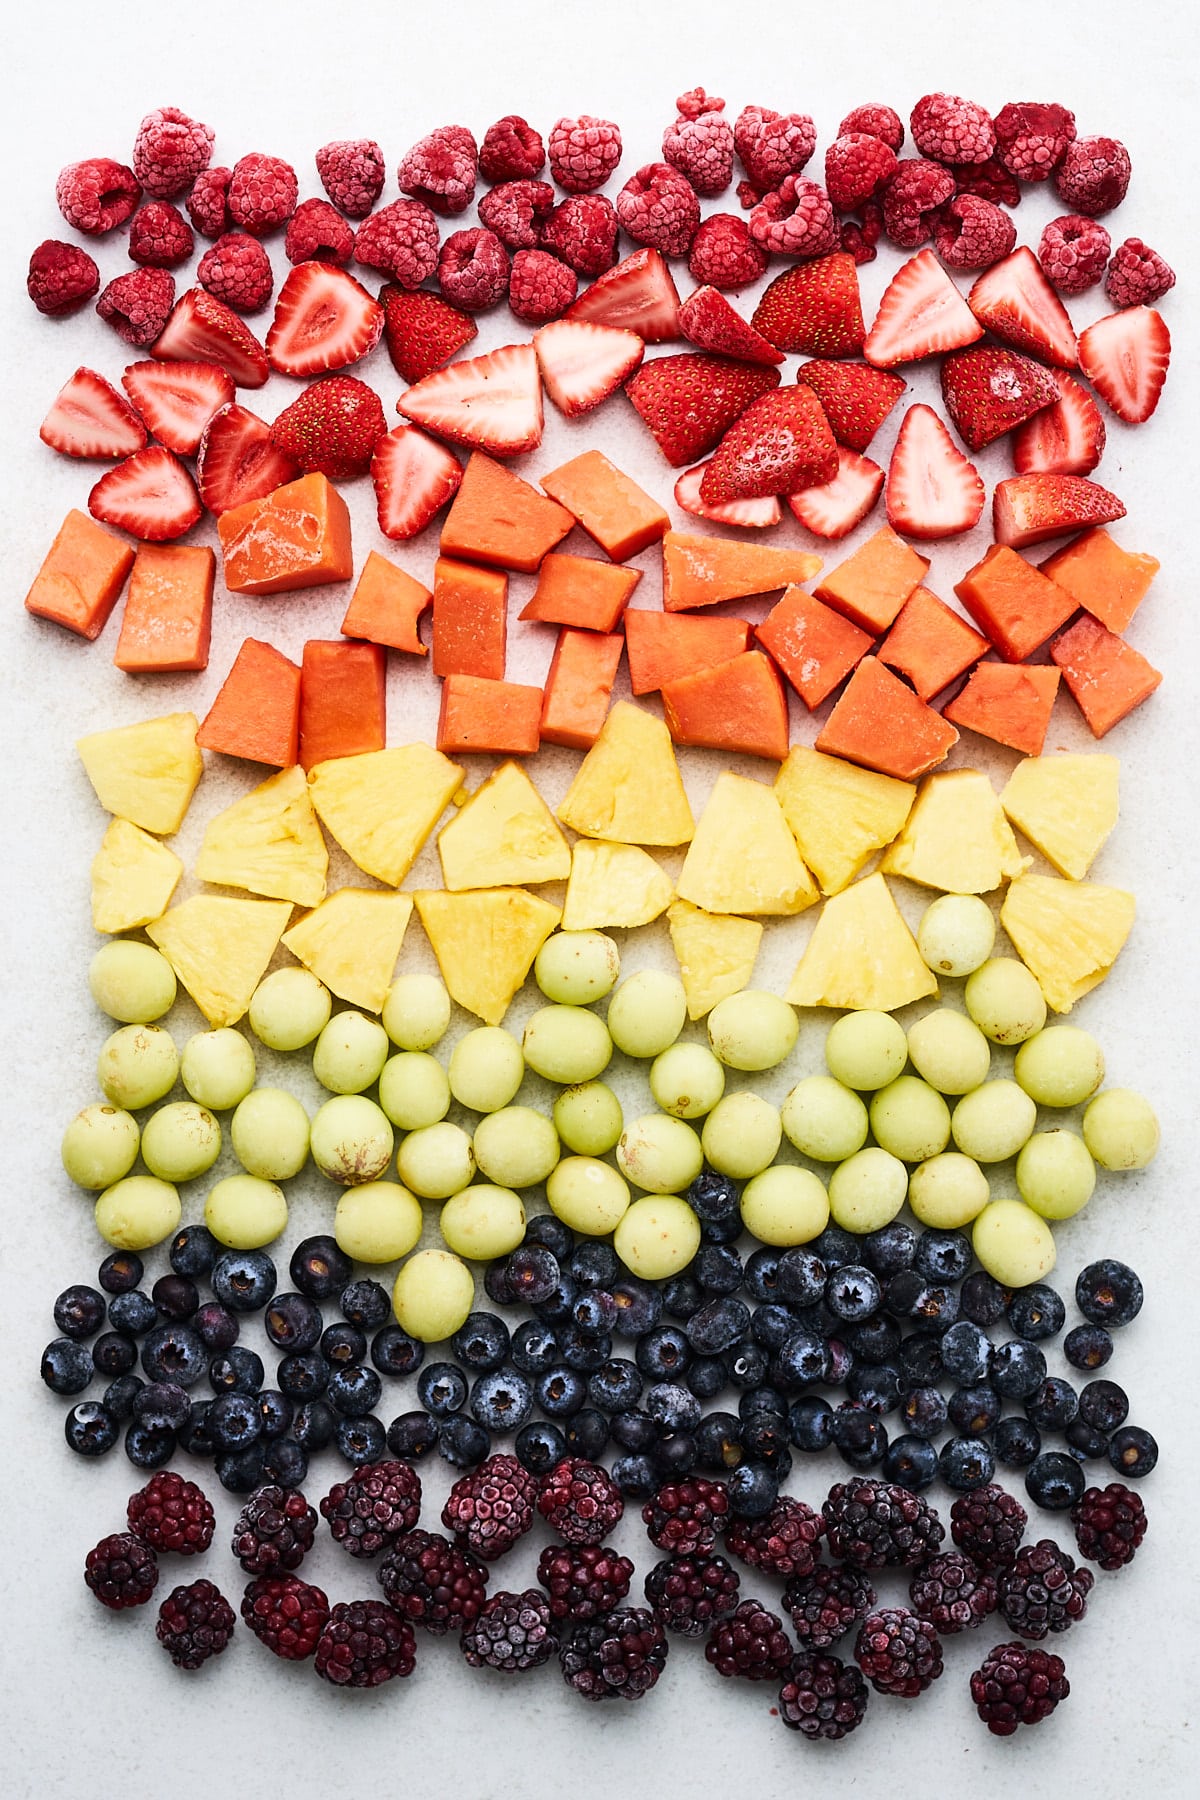 How to cut fruit for smoothies.